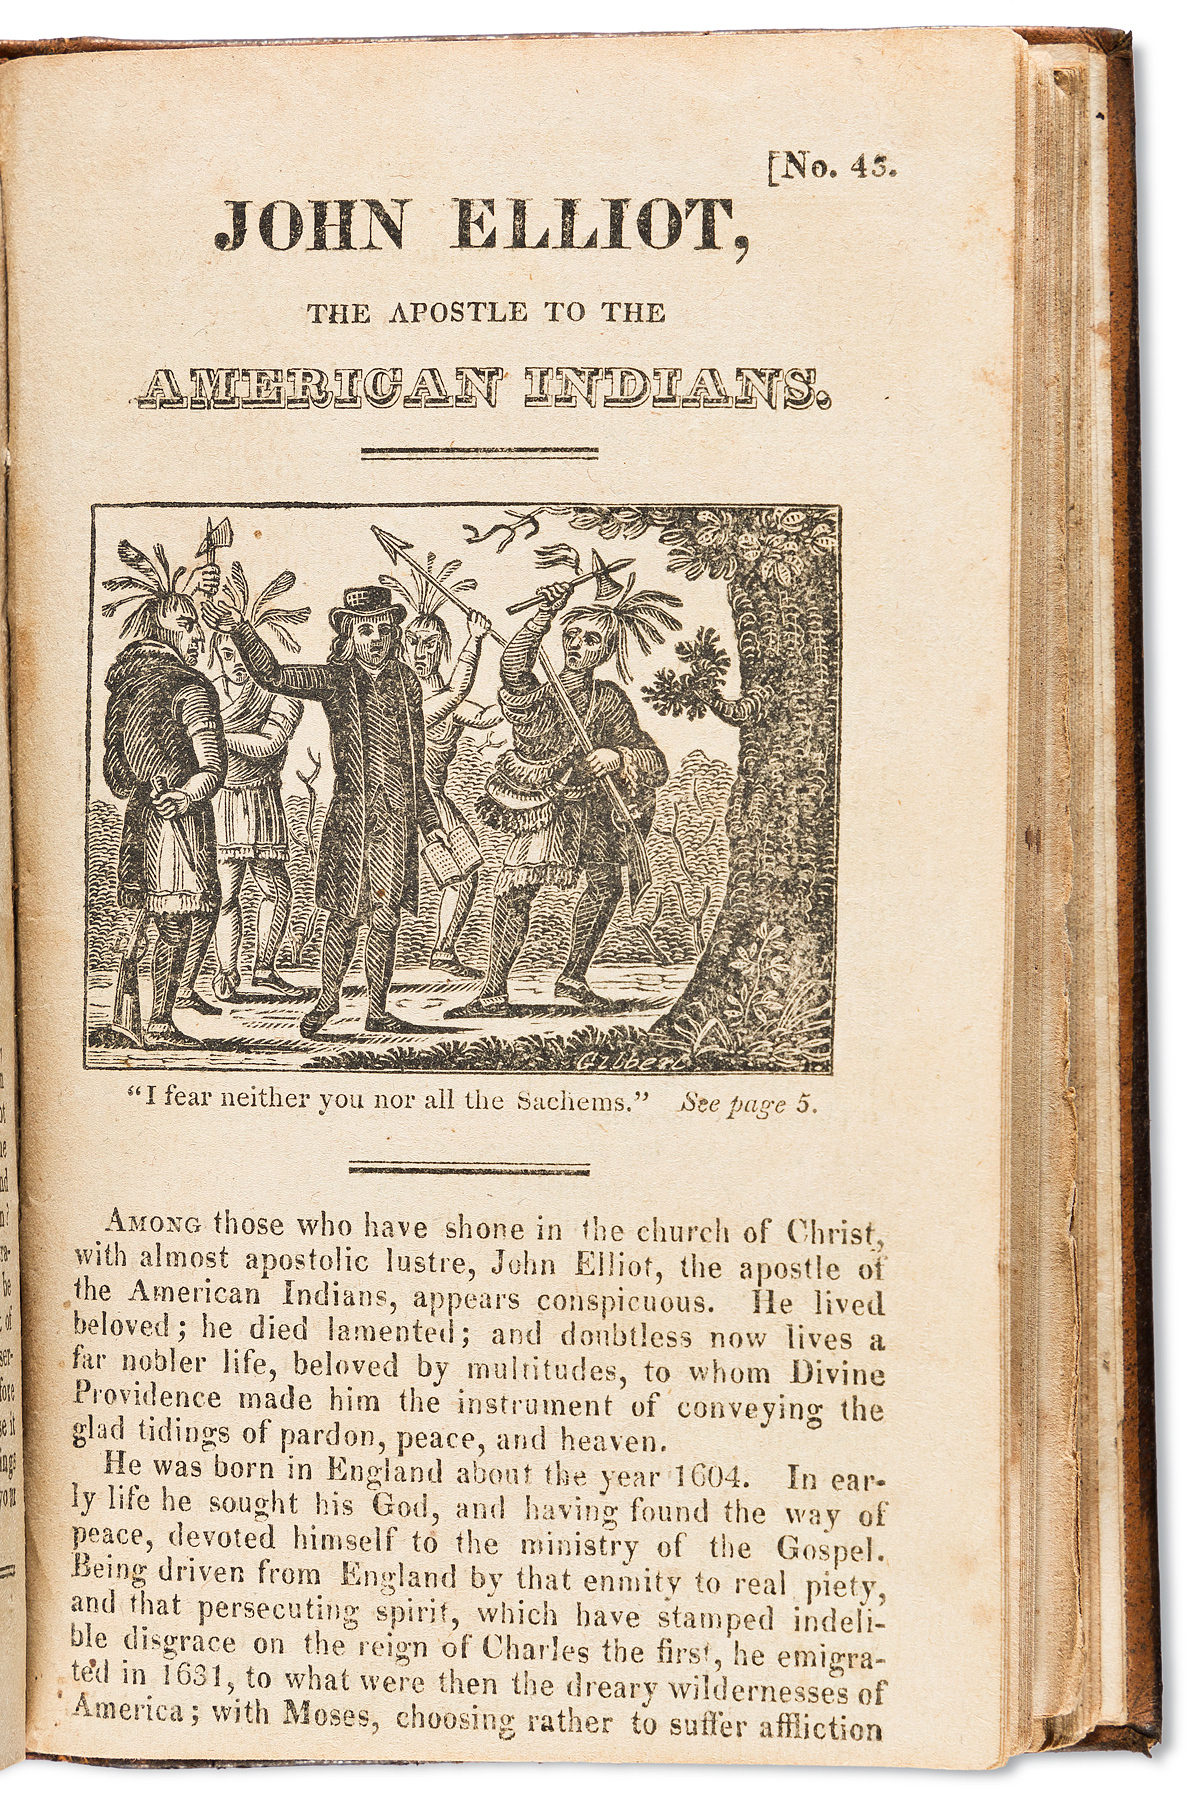 (AMERICAN INDIANS.) John Elliot, the Apostle to the American Indians,